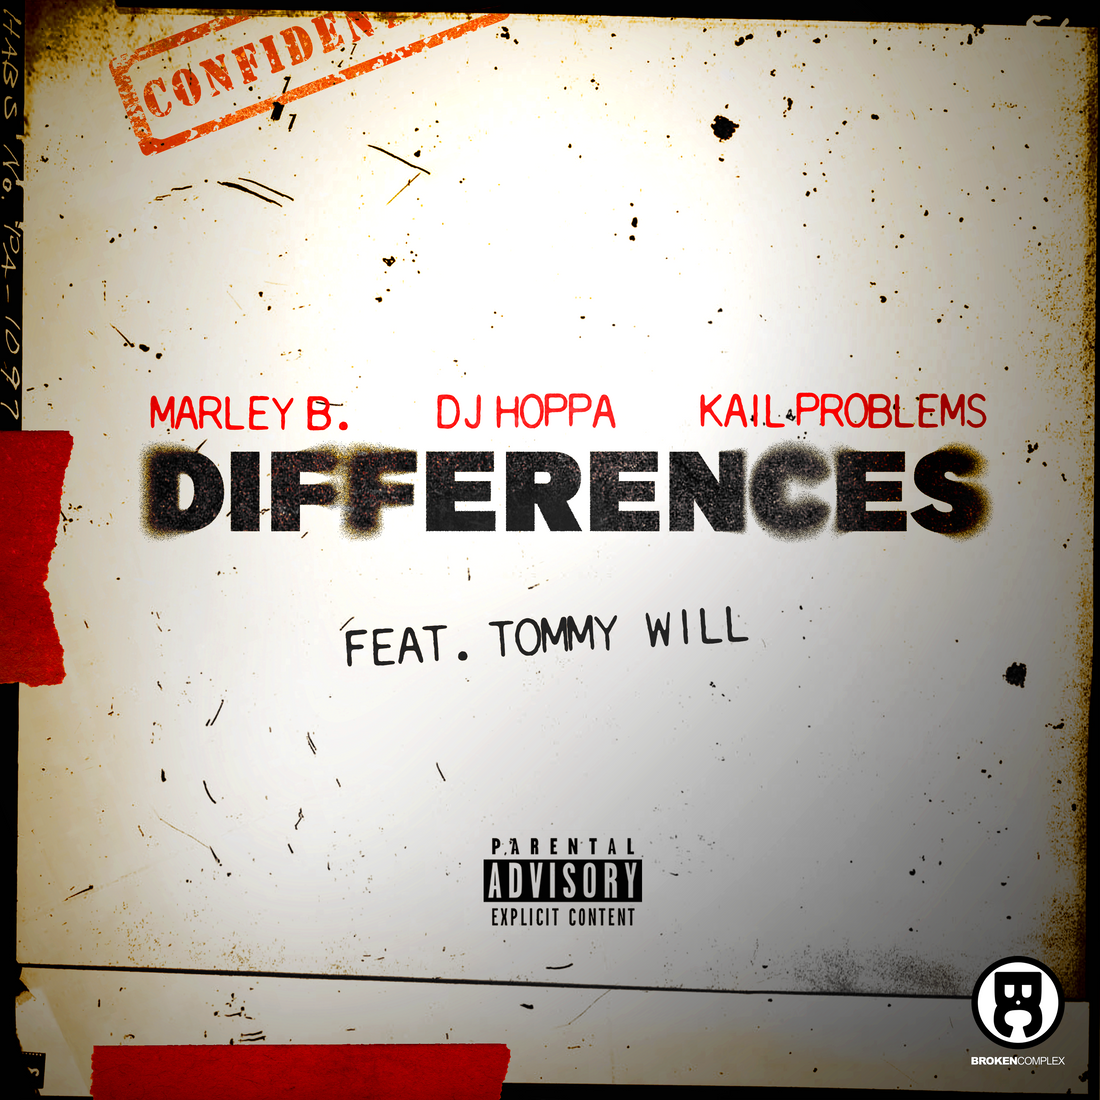 New Single: Marley B., Kail Problems, DJ Hoppa - Differences feat. Tommy Will